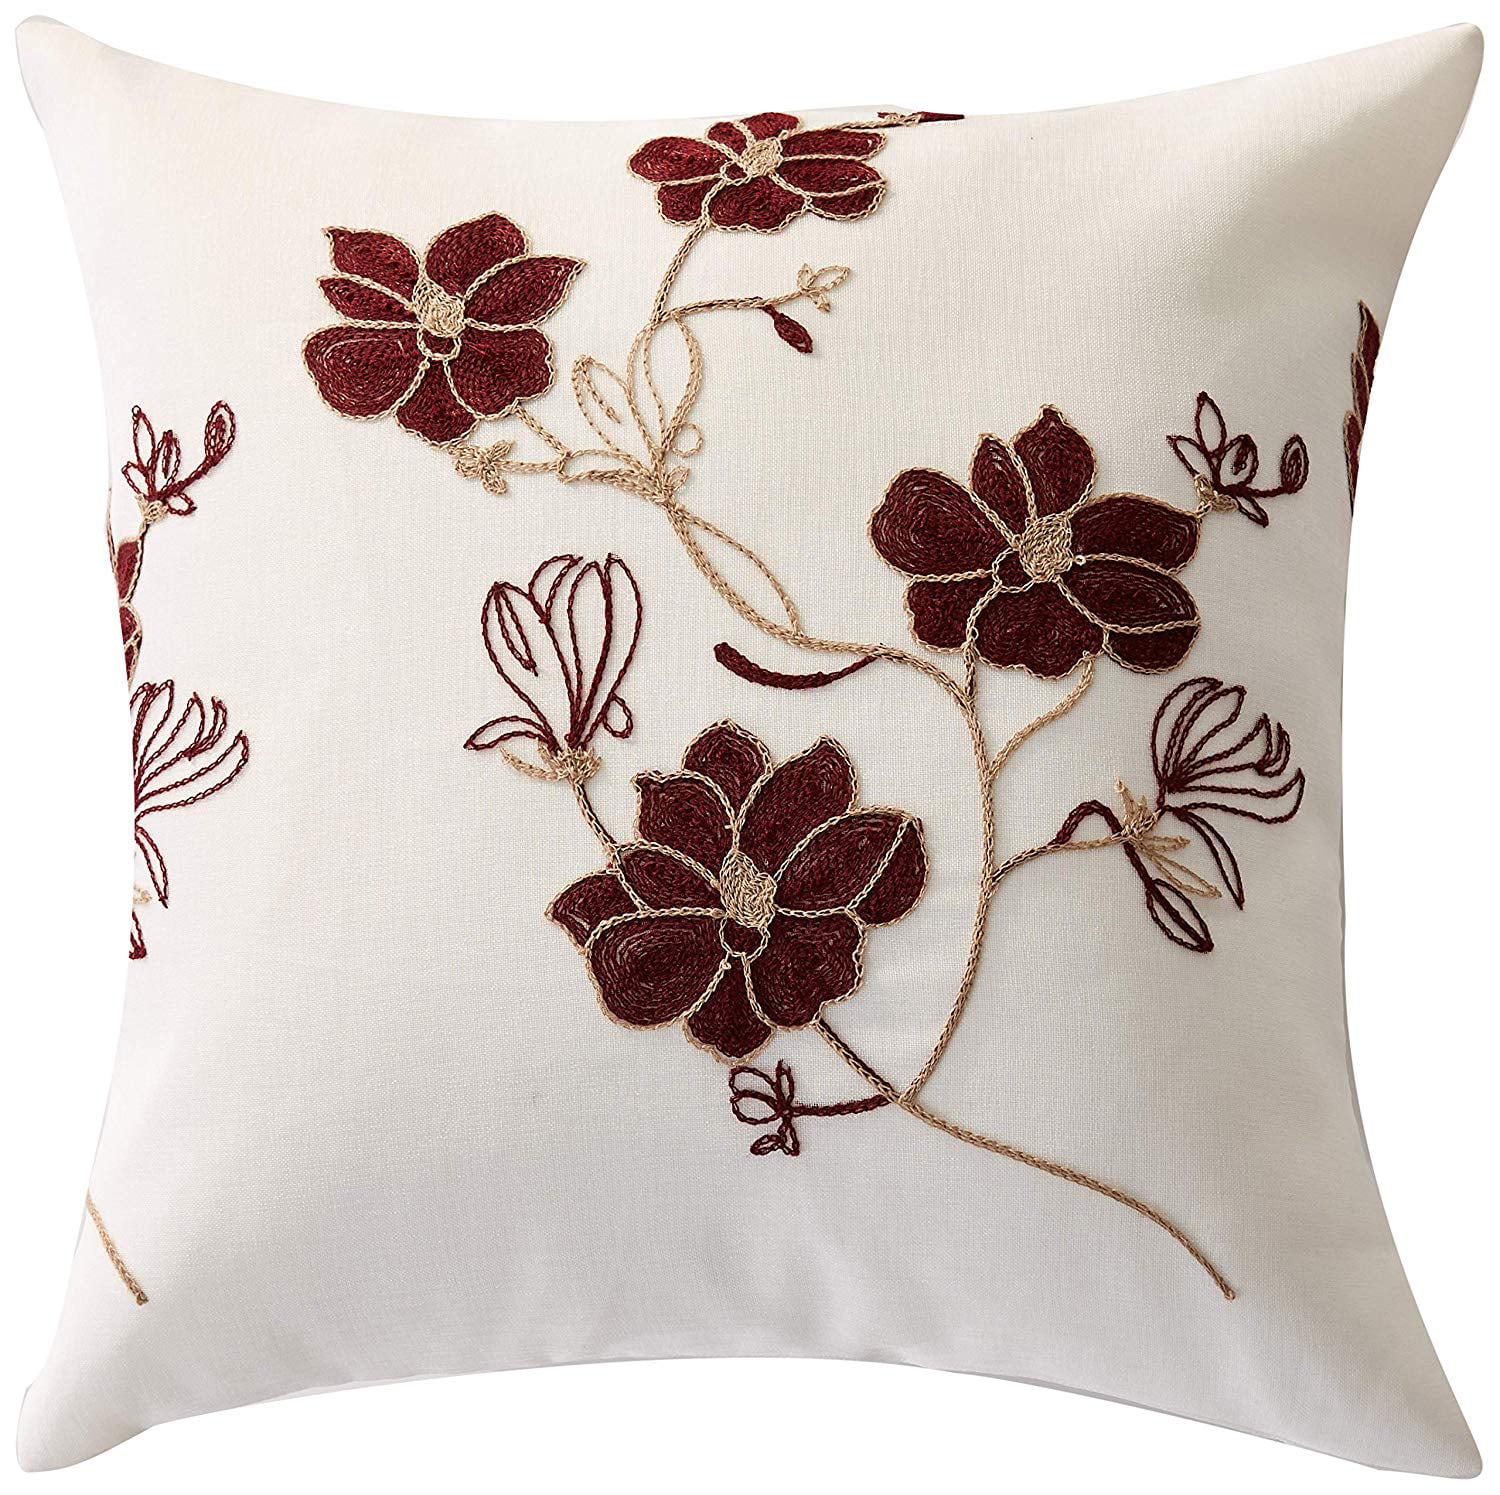 Floral Embroidered Maroon Pillow Cover Throw Pillows Cotton Cushion Case 